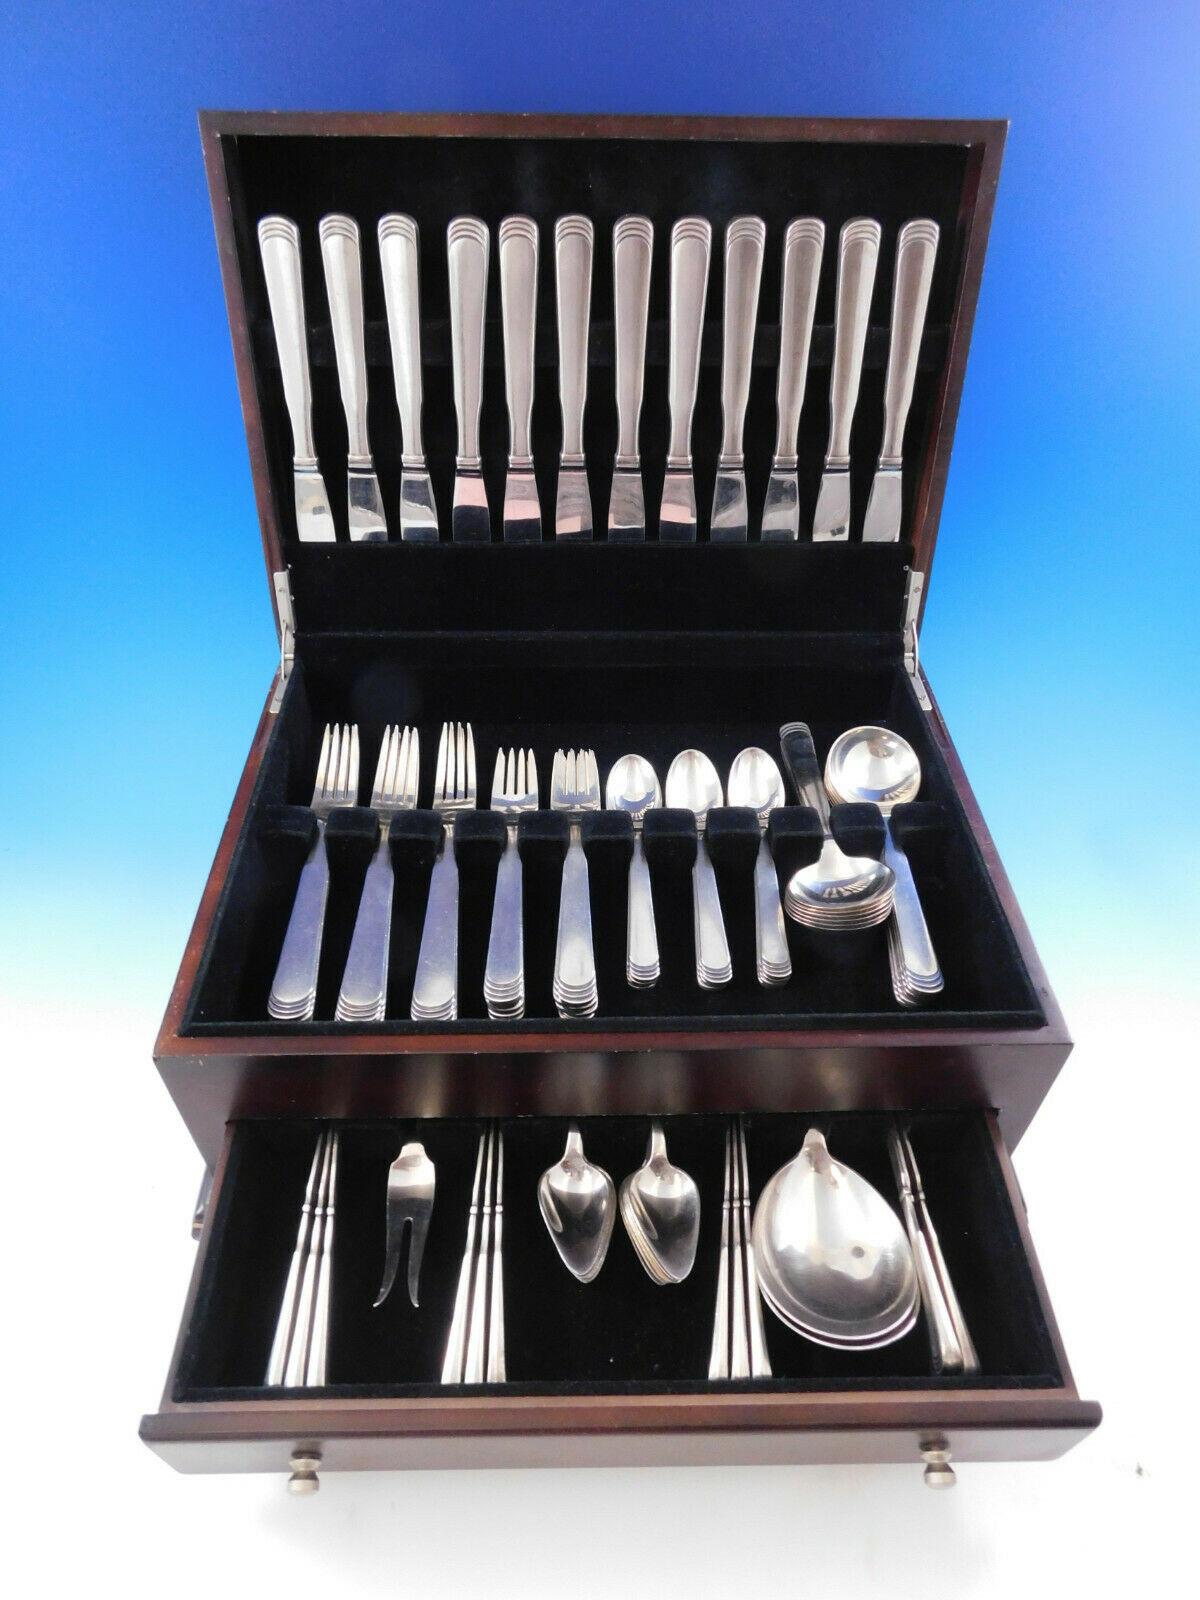 Dinner size ripple by Hans Hansen Danish sterling silver flatware set, 87 pieces. This set includes:

12 dinner knives, long handle, 8 7/8